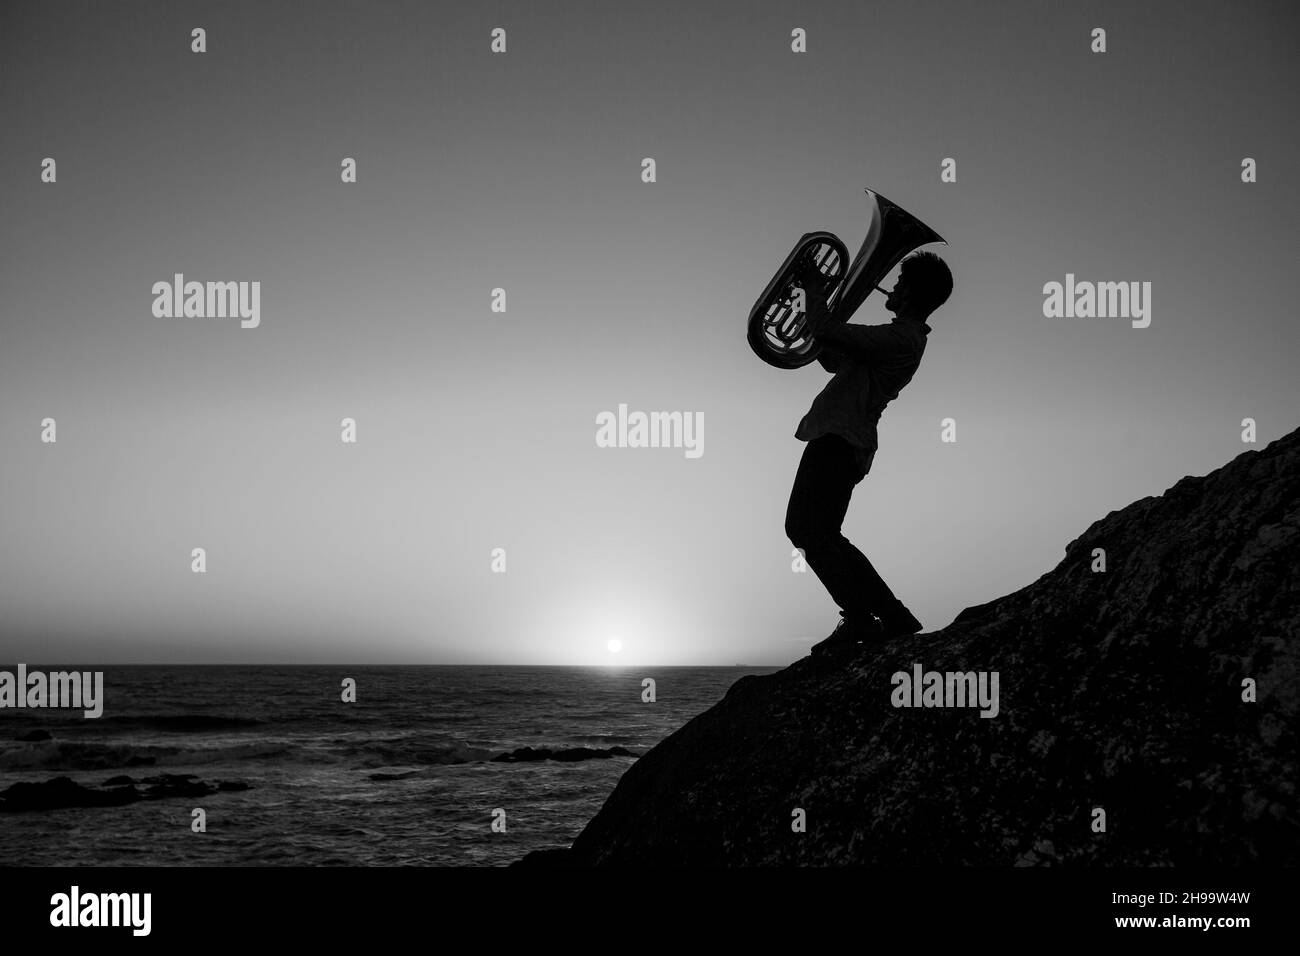 Silhouette of a man playing a trumpet by the ocean. Black and white photo. Stock Photo